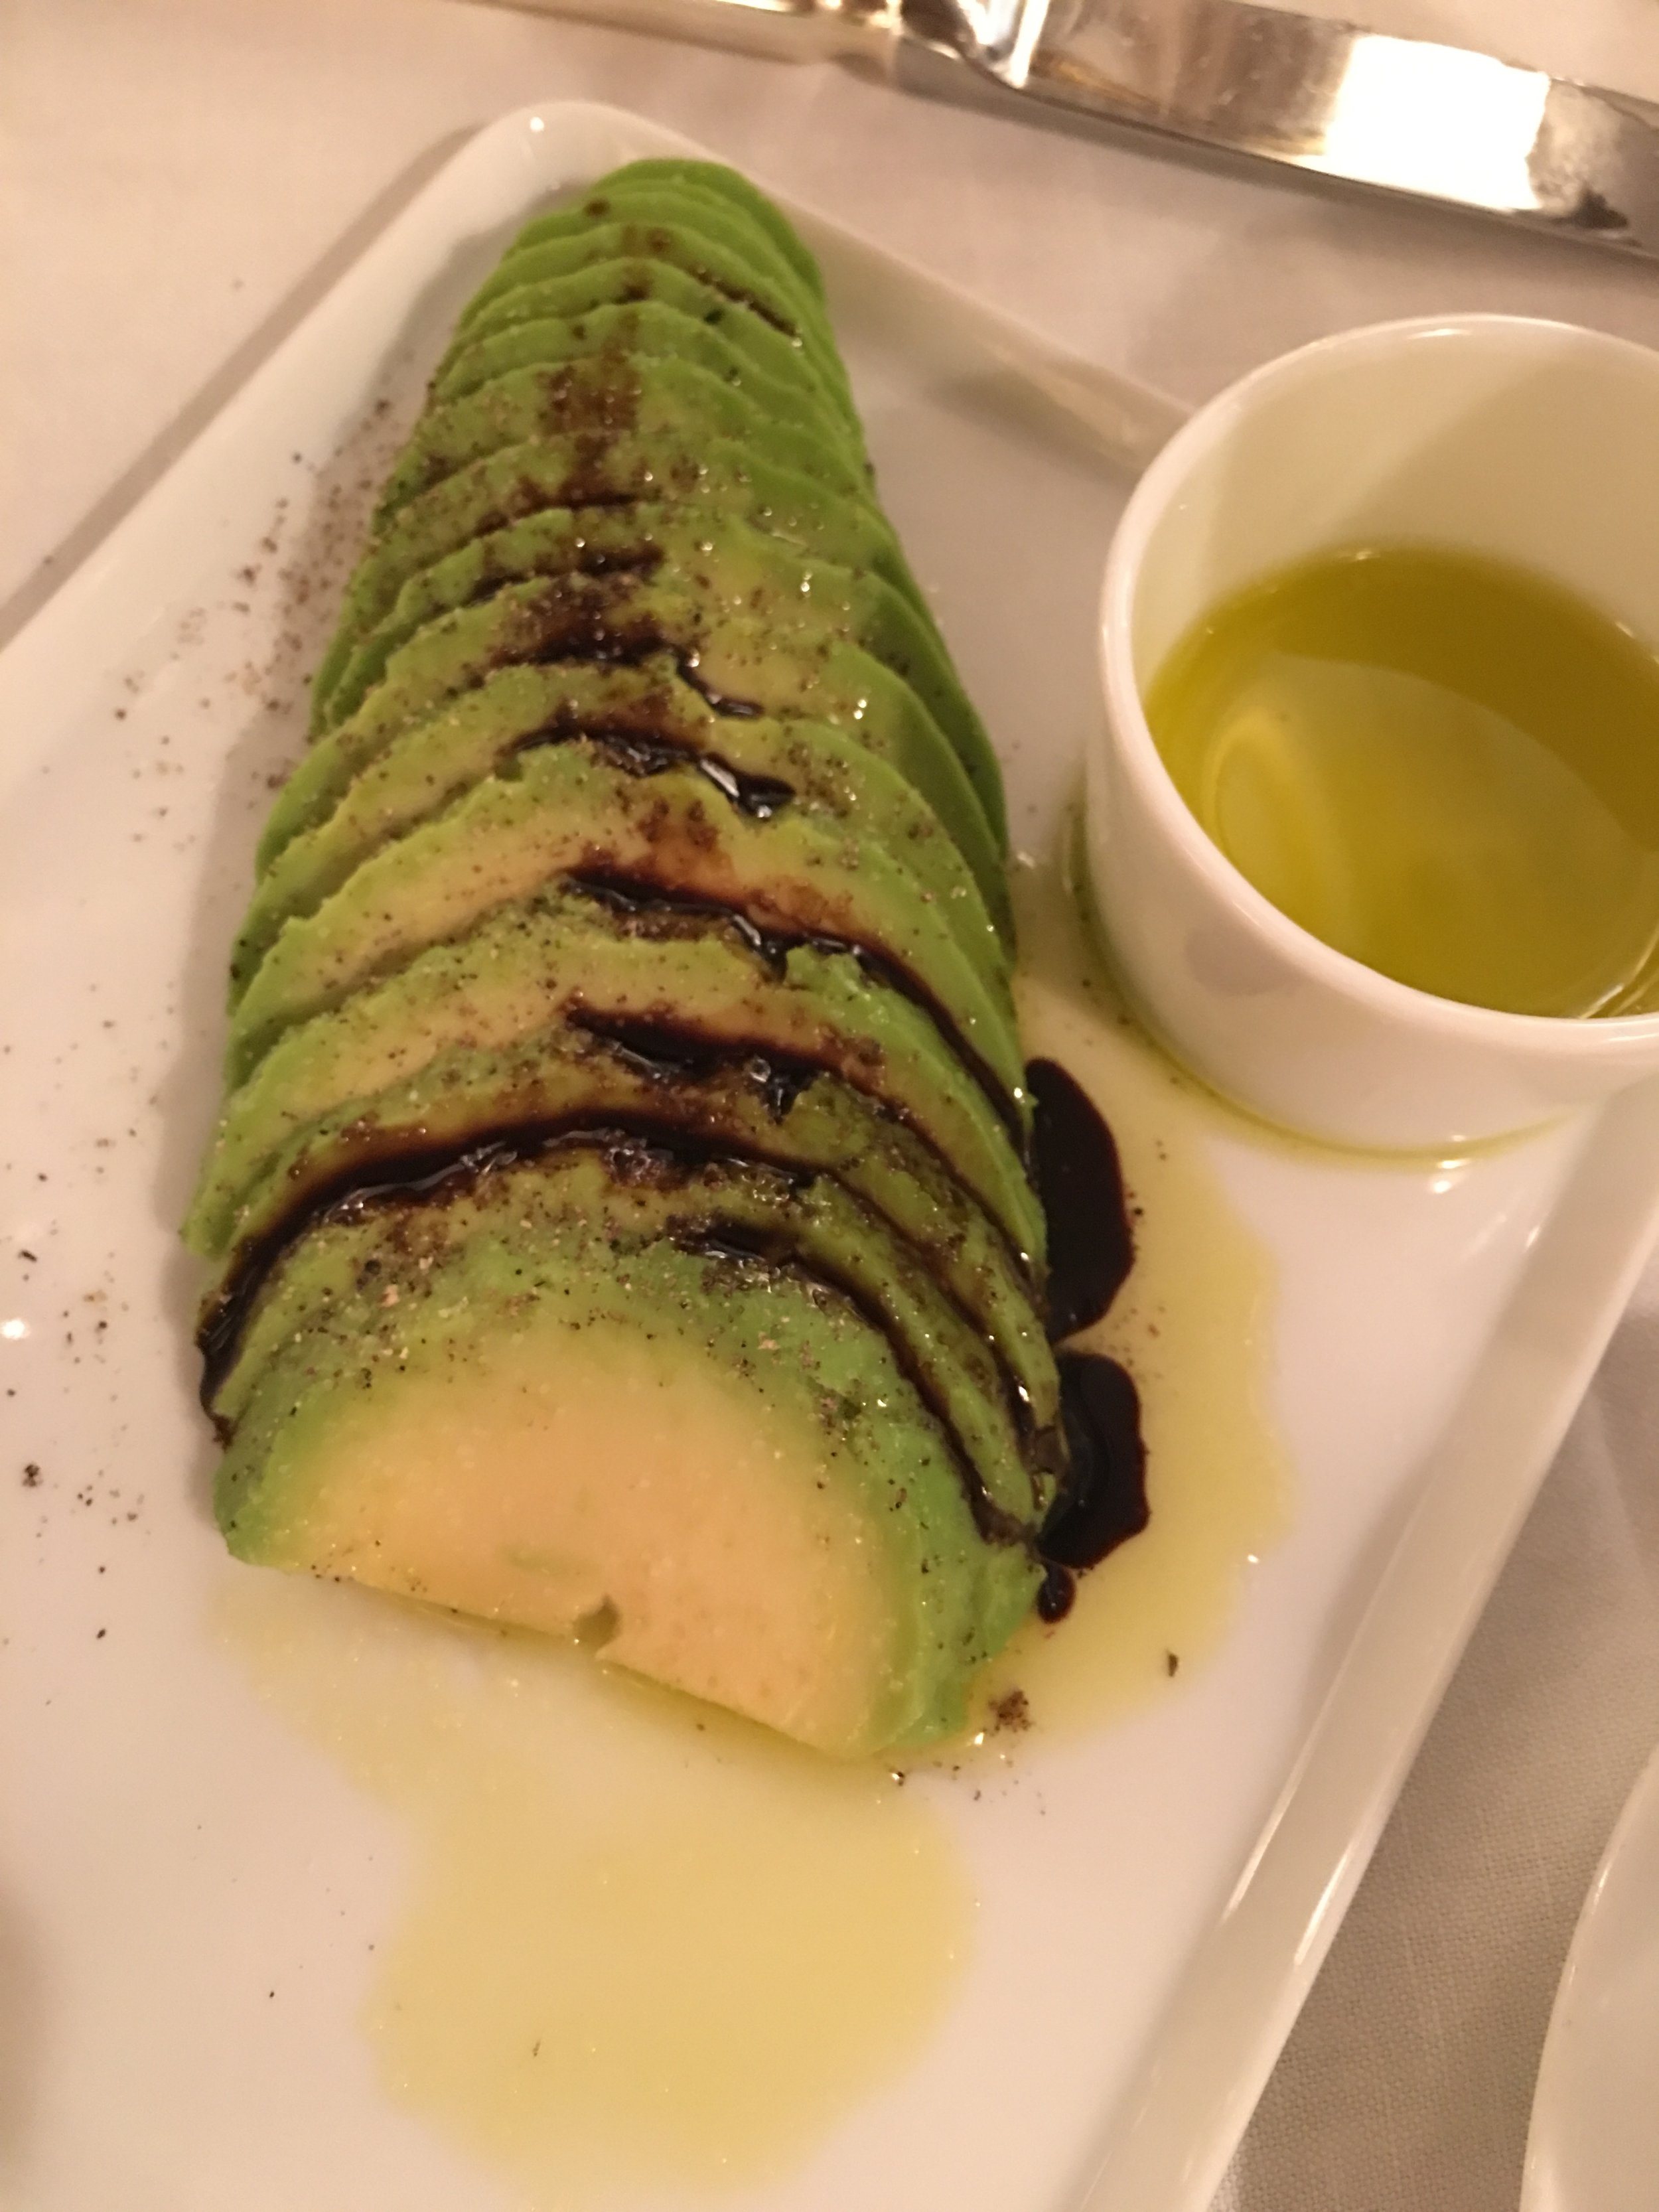 Hotel Costes side of avo with balsamic - heaven!